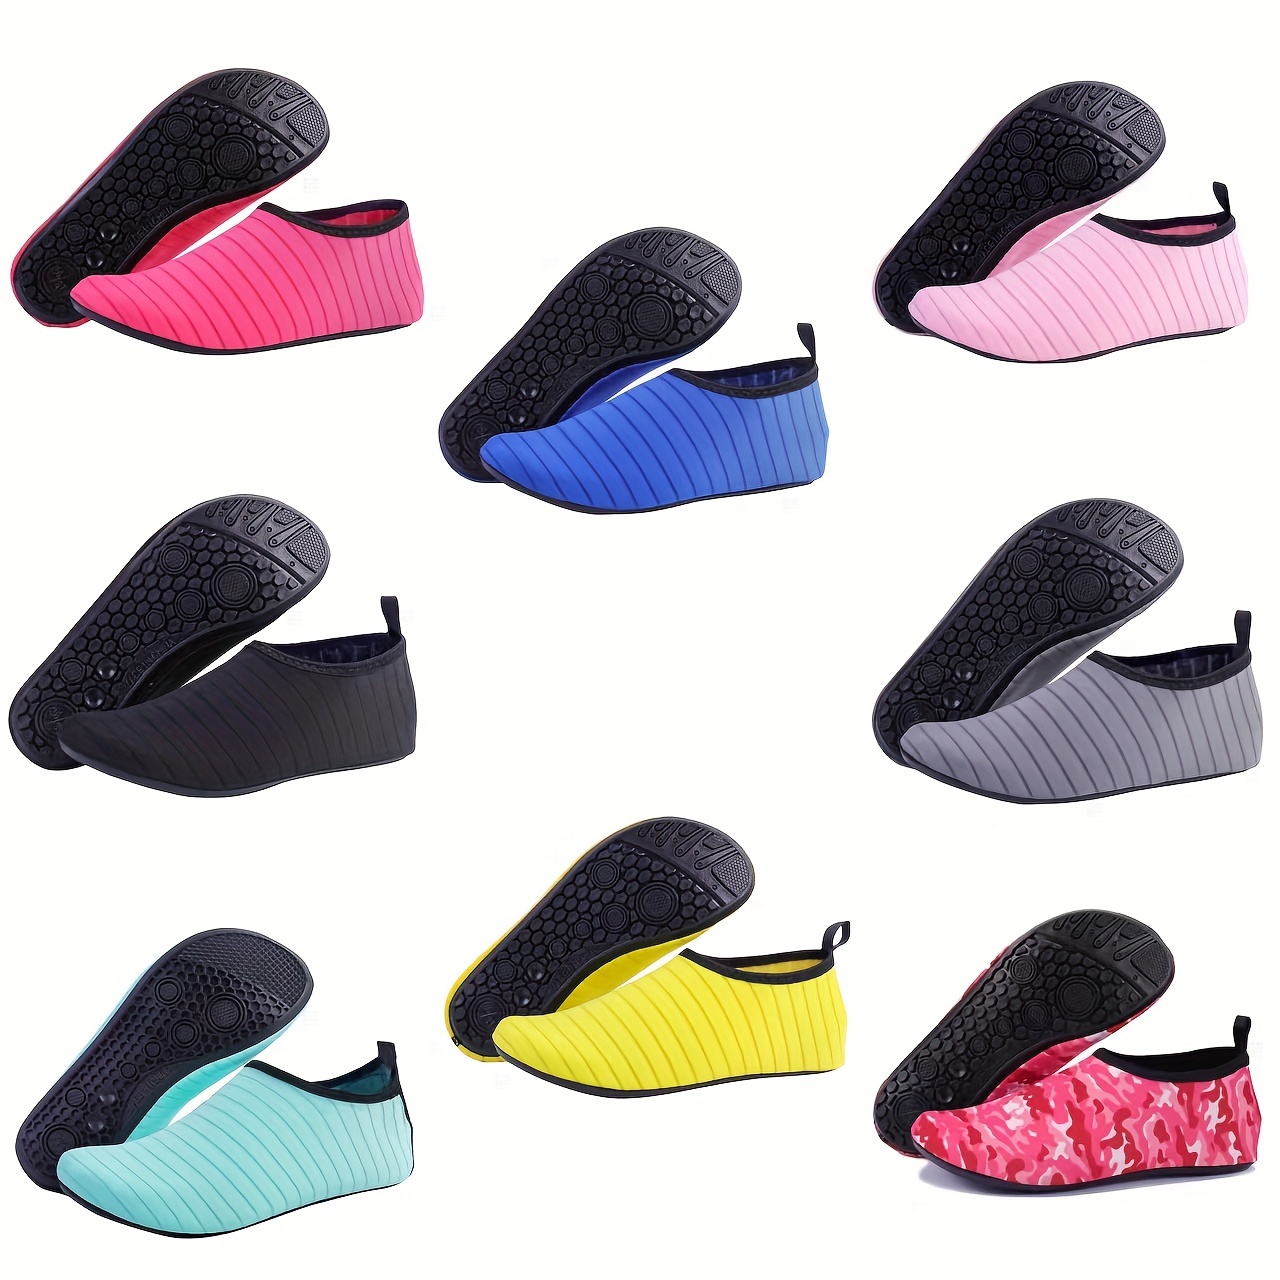 Kids water shoes for swimming and hiking - Reviewed